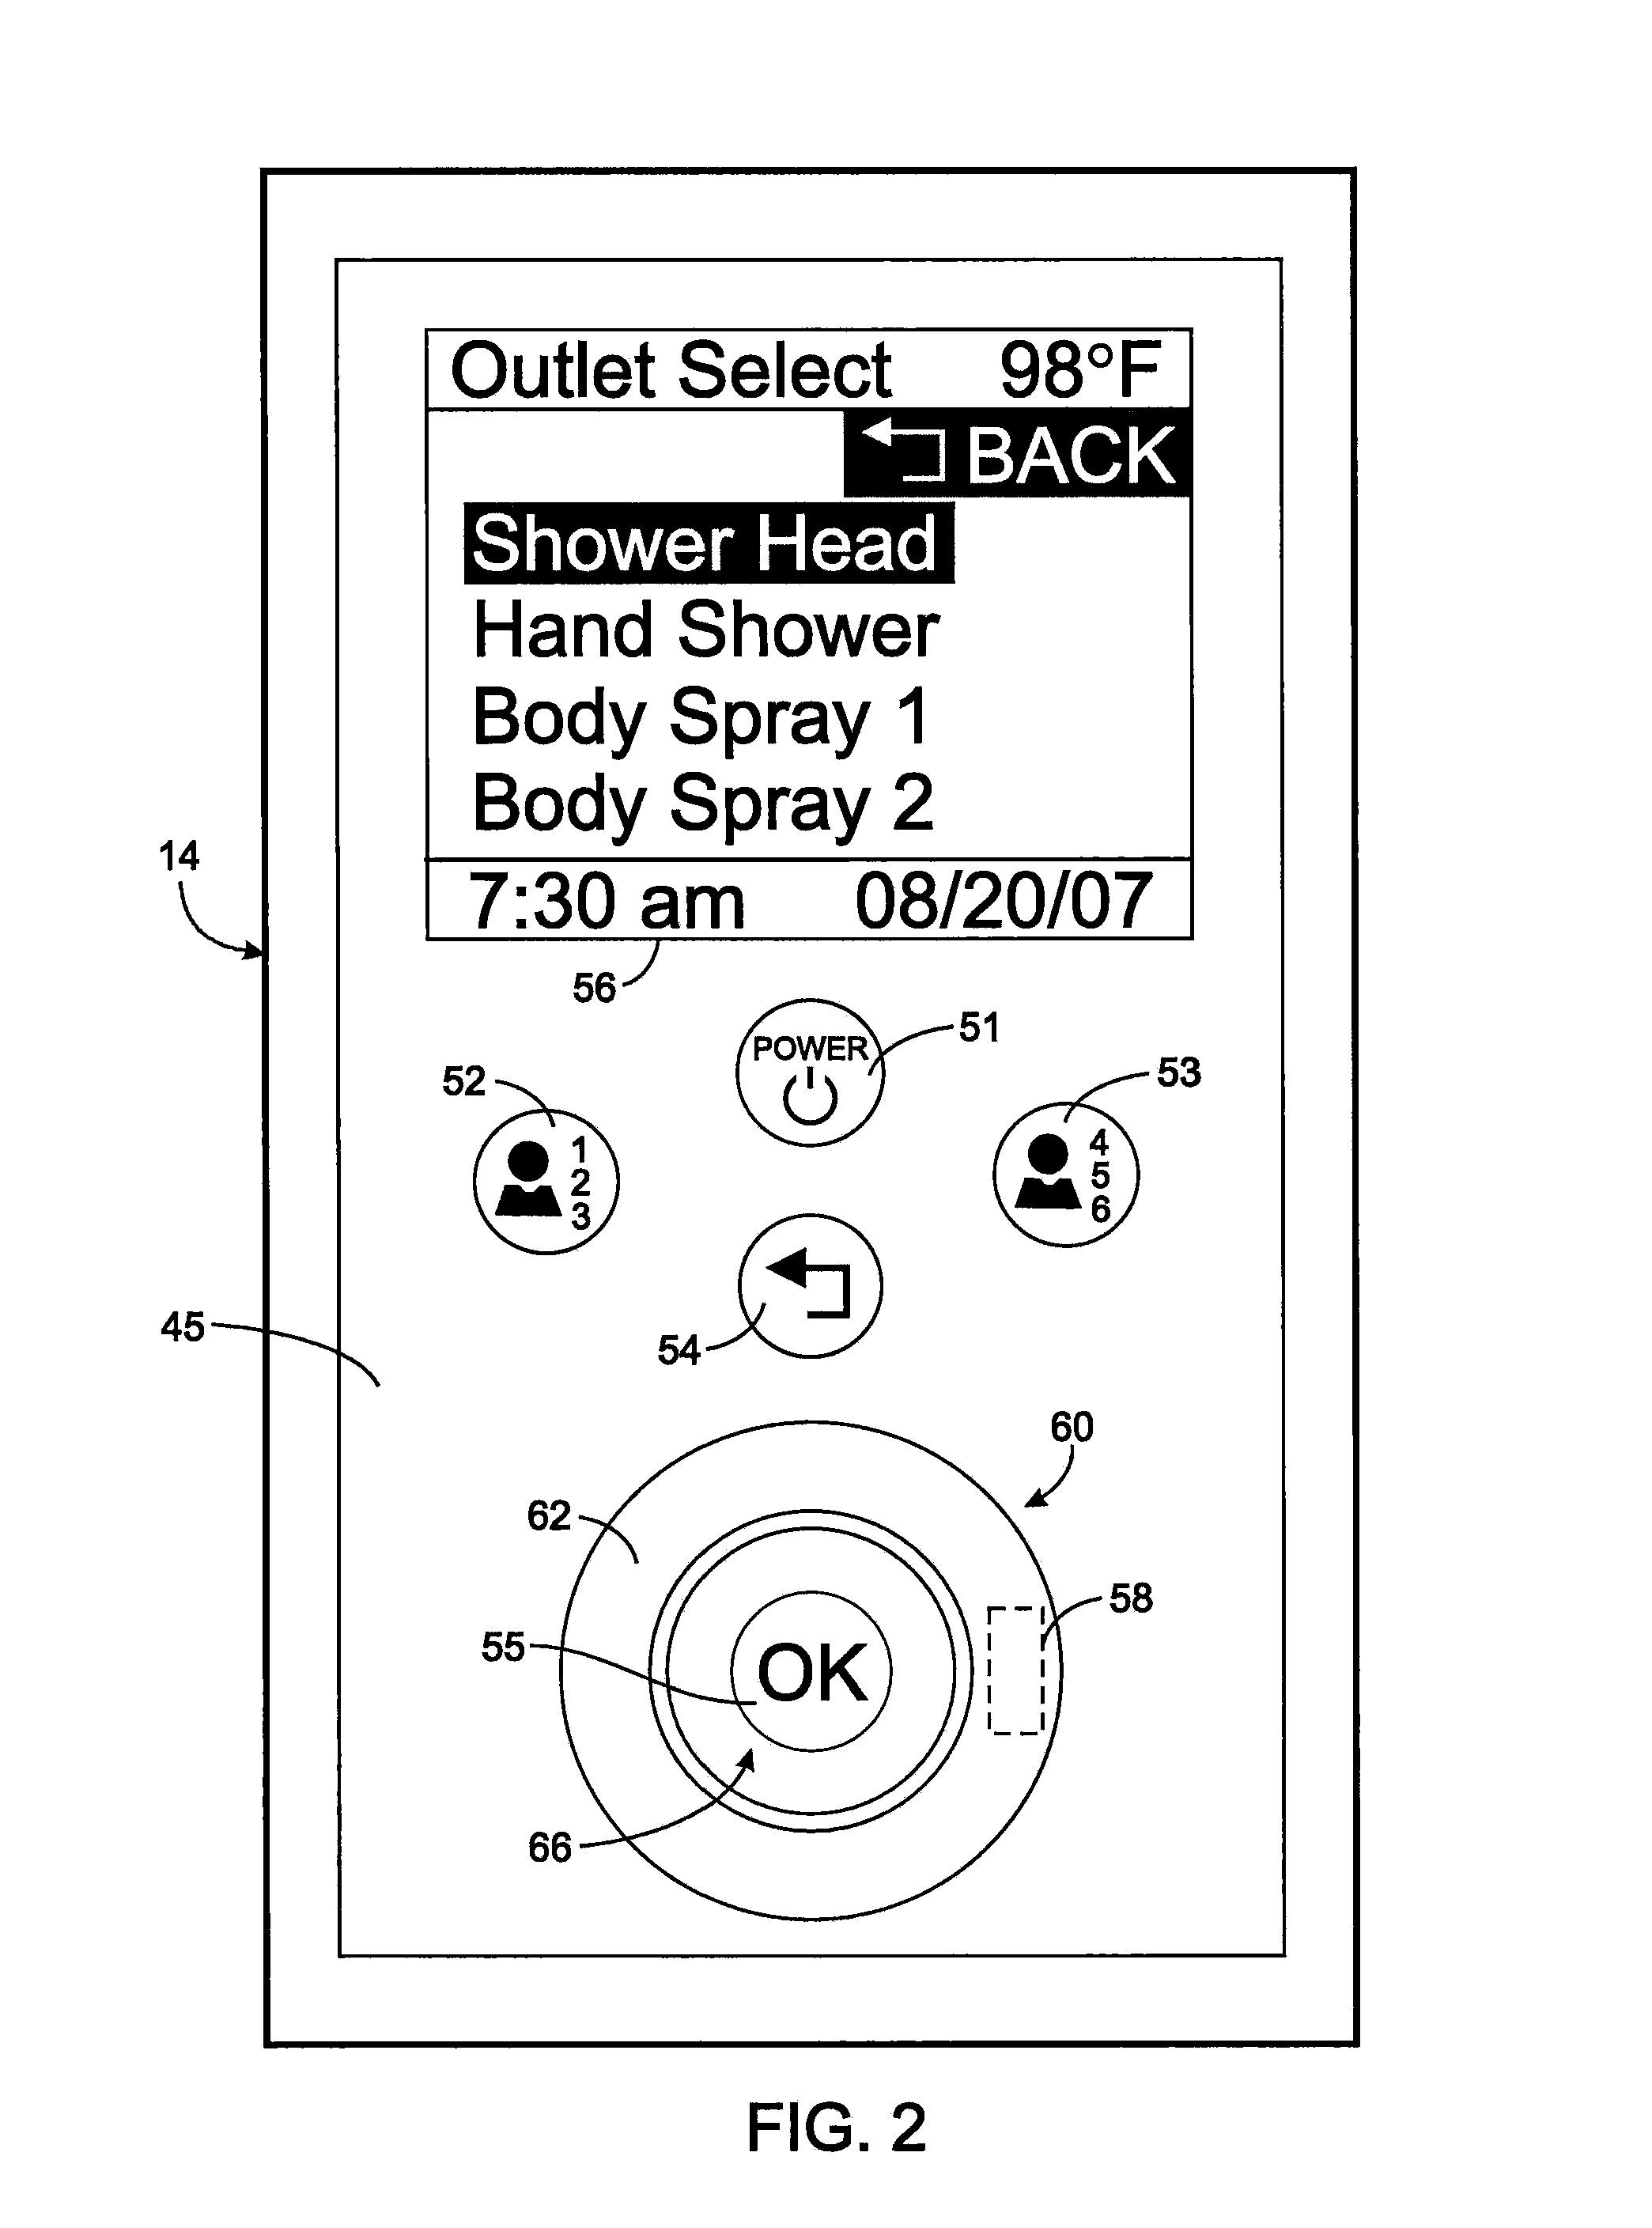 User interface for controlling a bathroom plumbing fixture